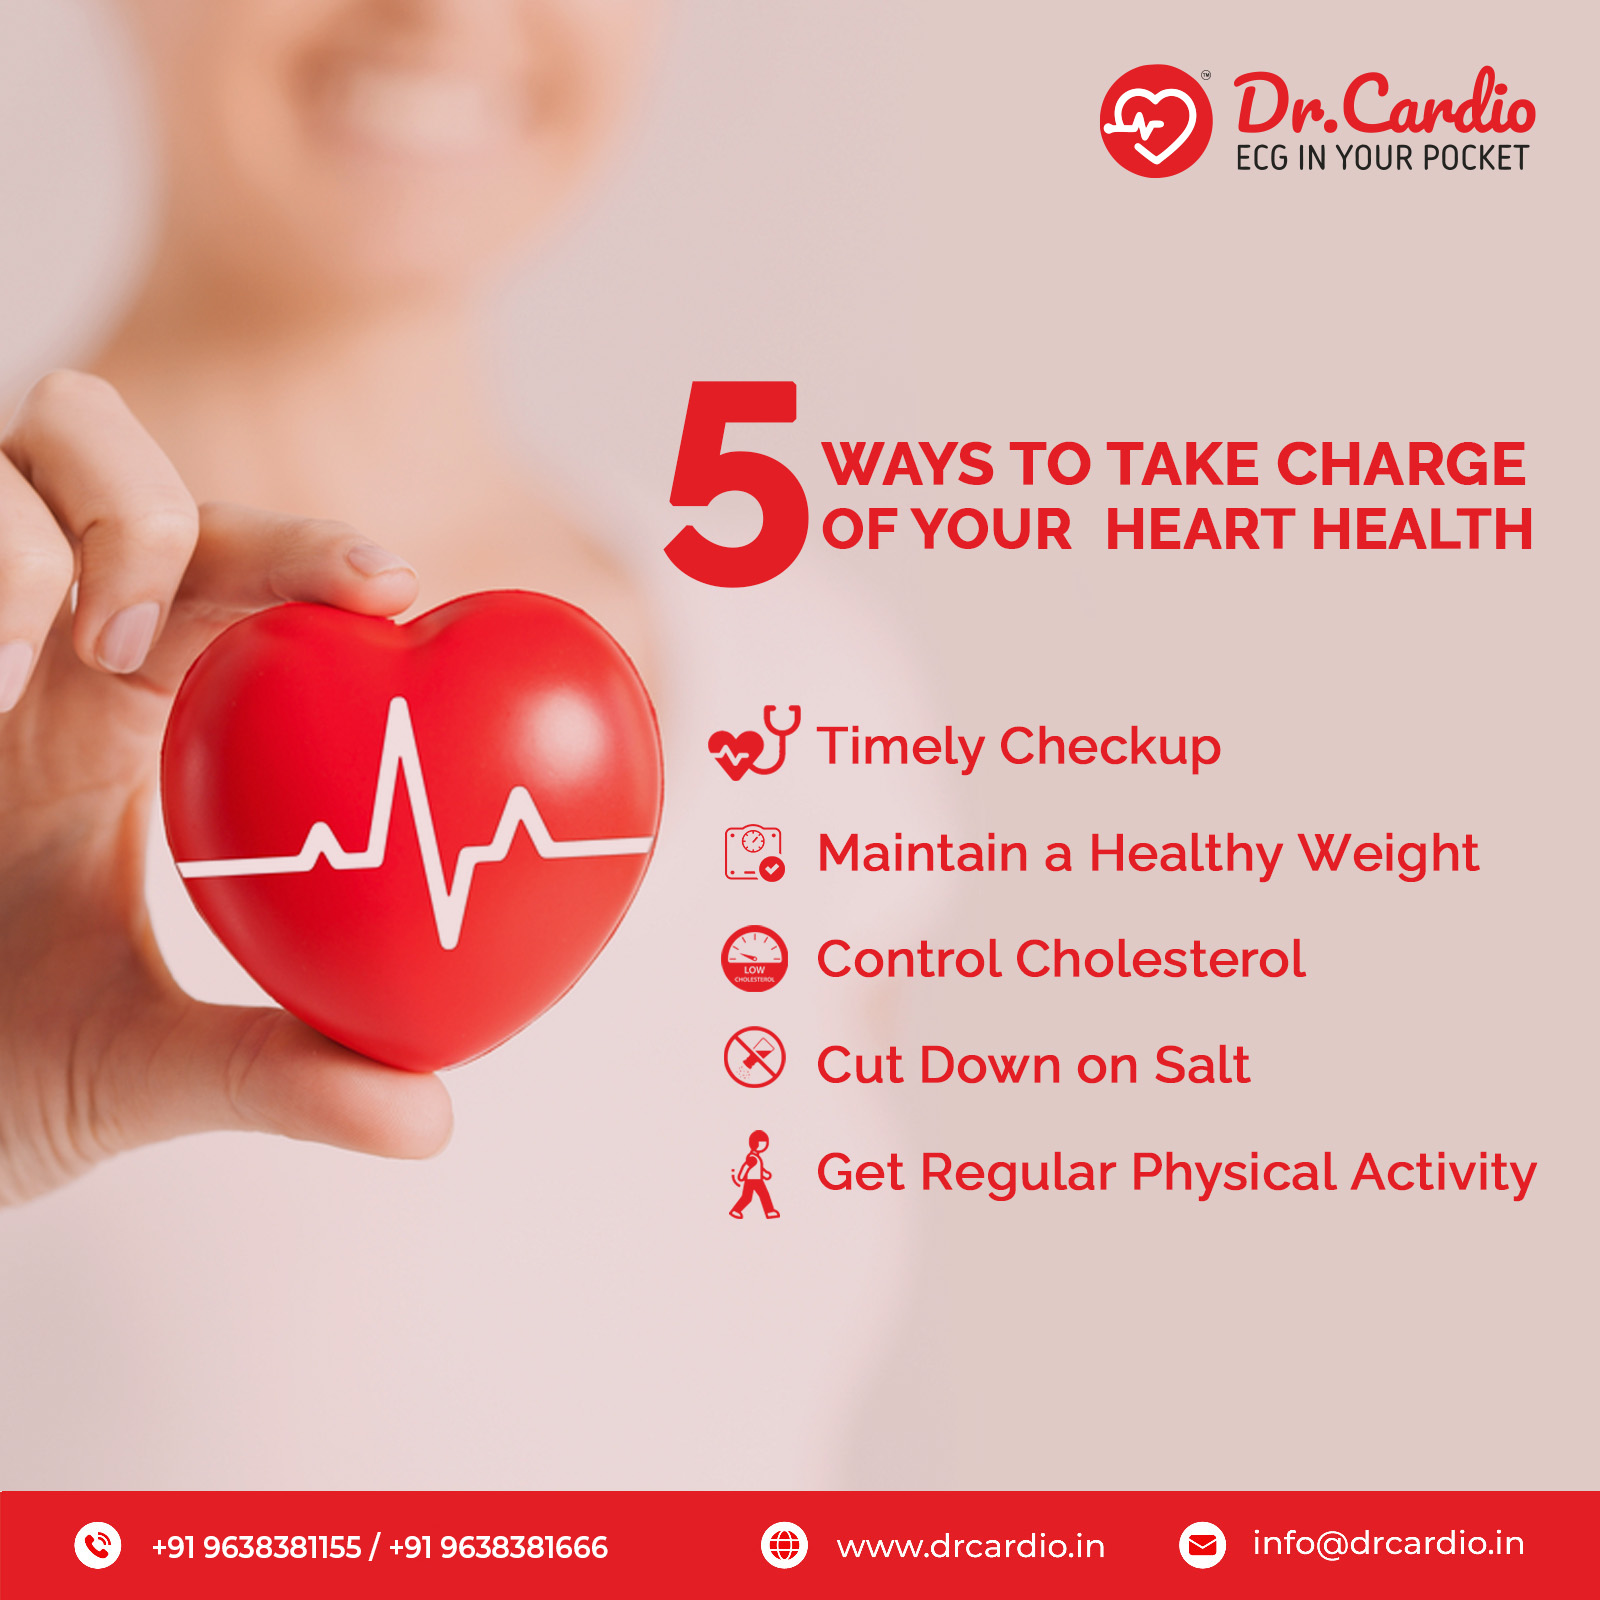 5 Ways to Take Charge of Your Heart Health